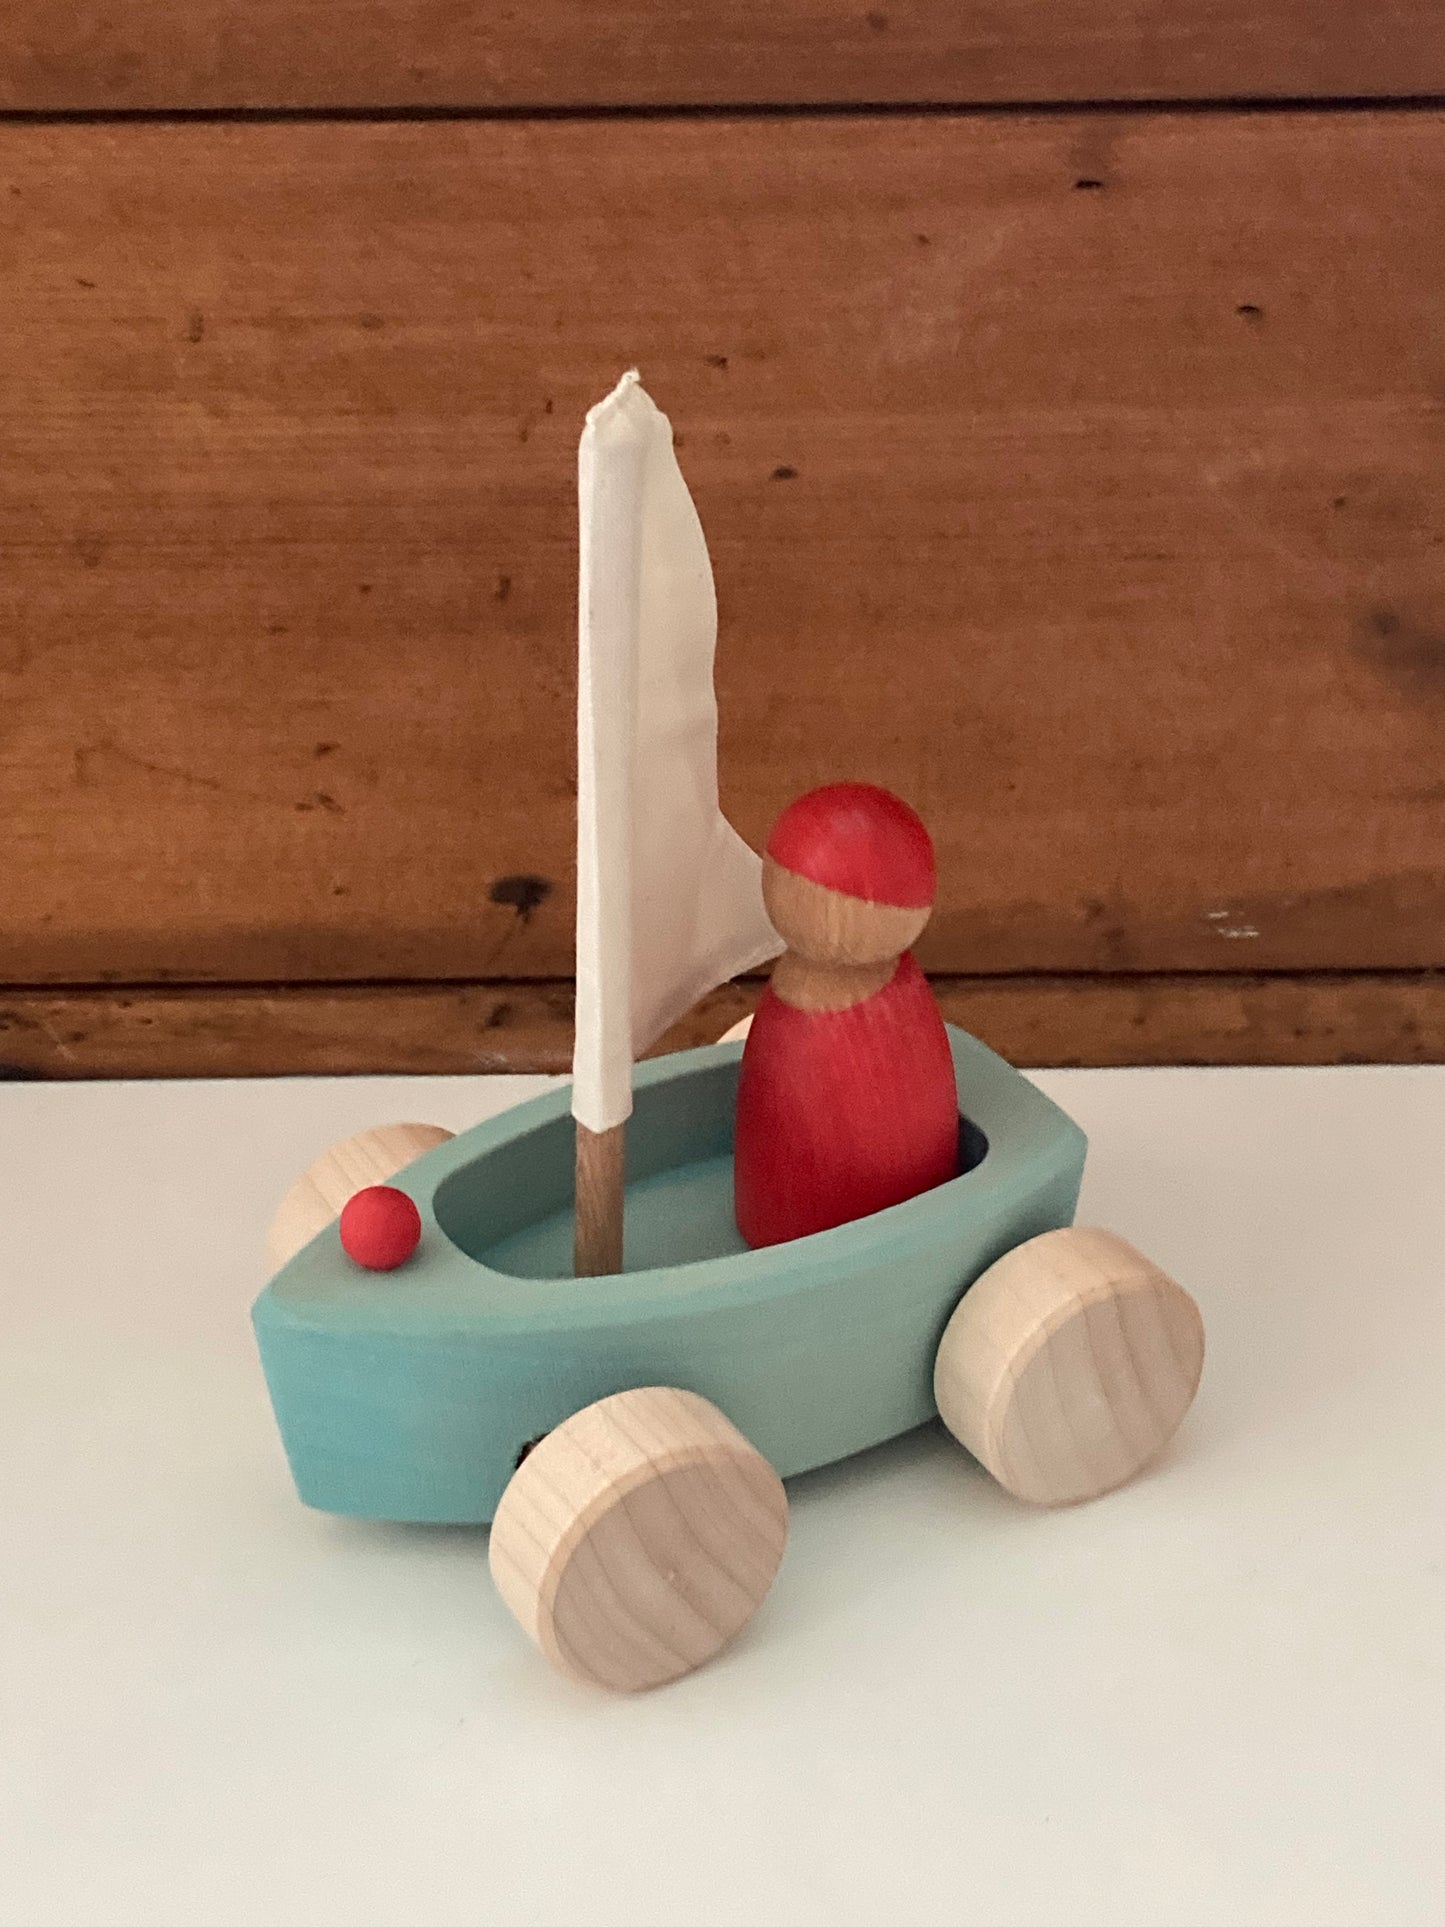 Wooden Toy - SAILBOAT in BLUE and SKIPPER in RED… on wheels!